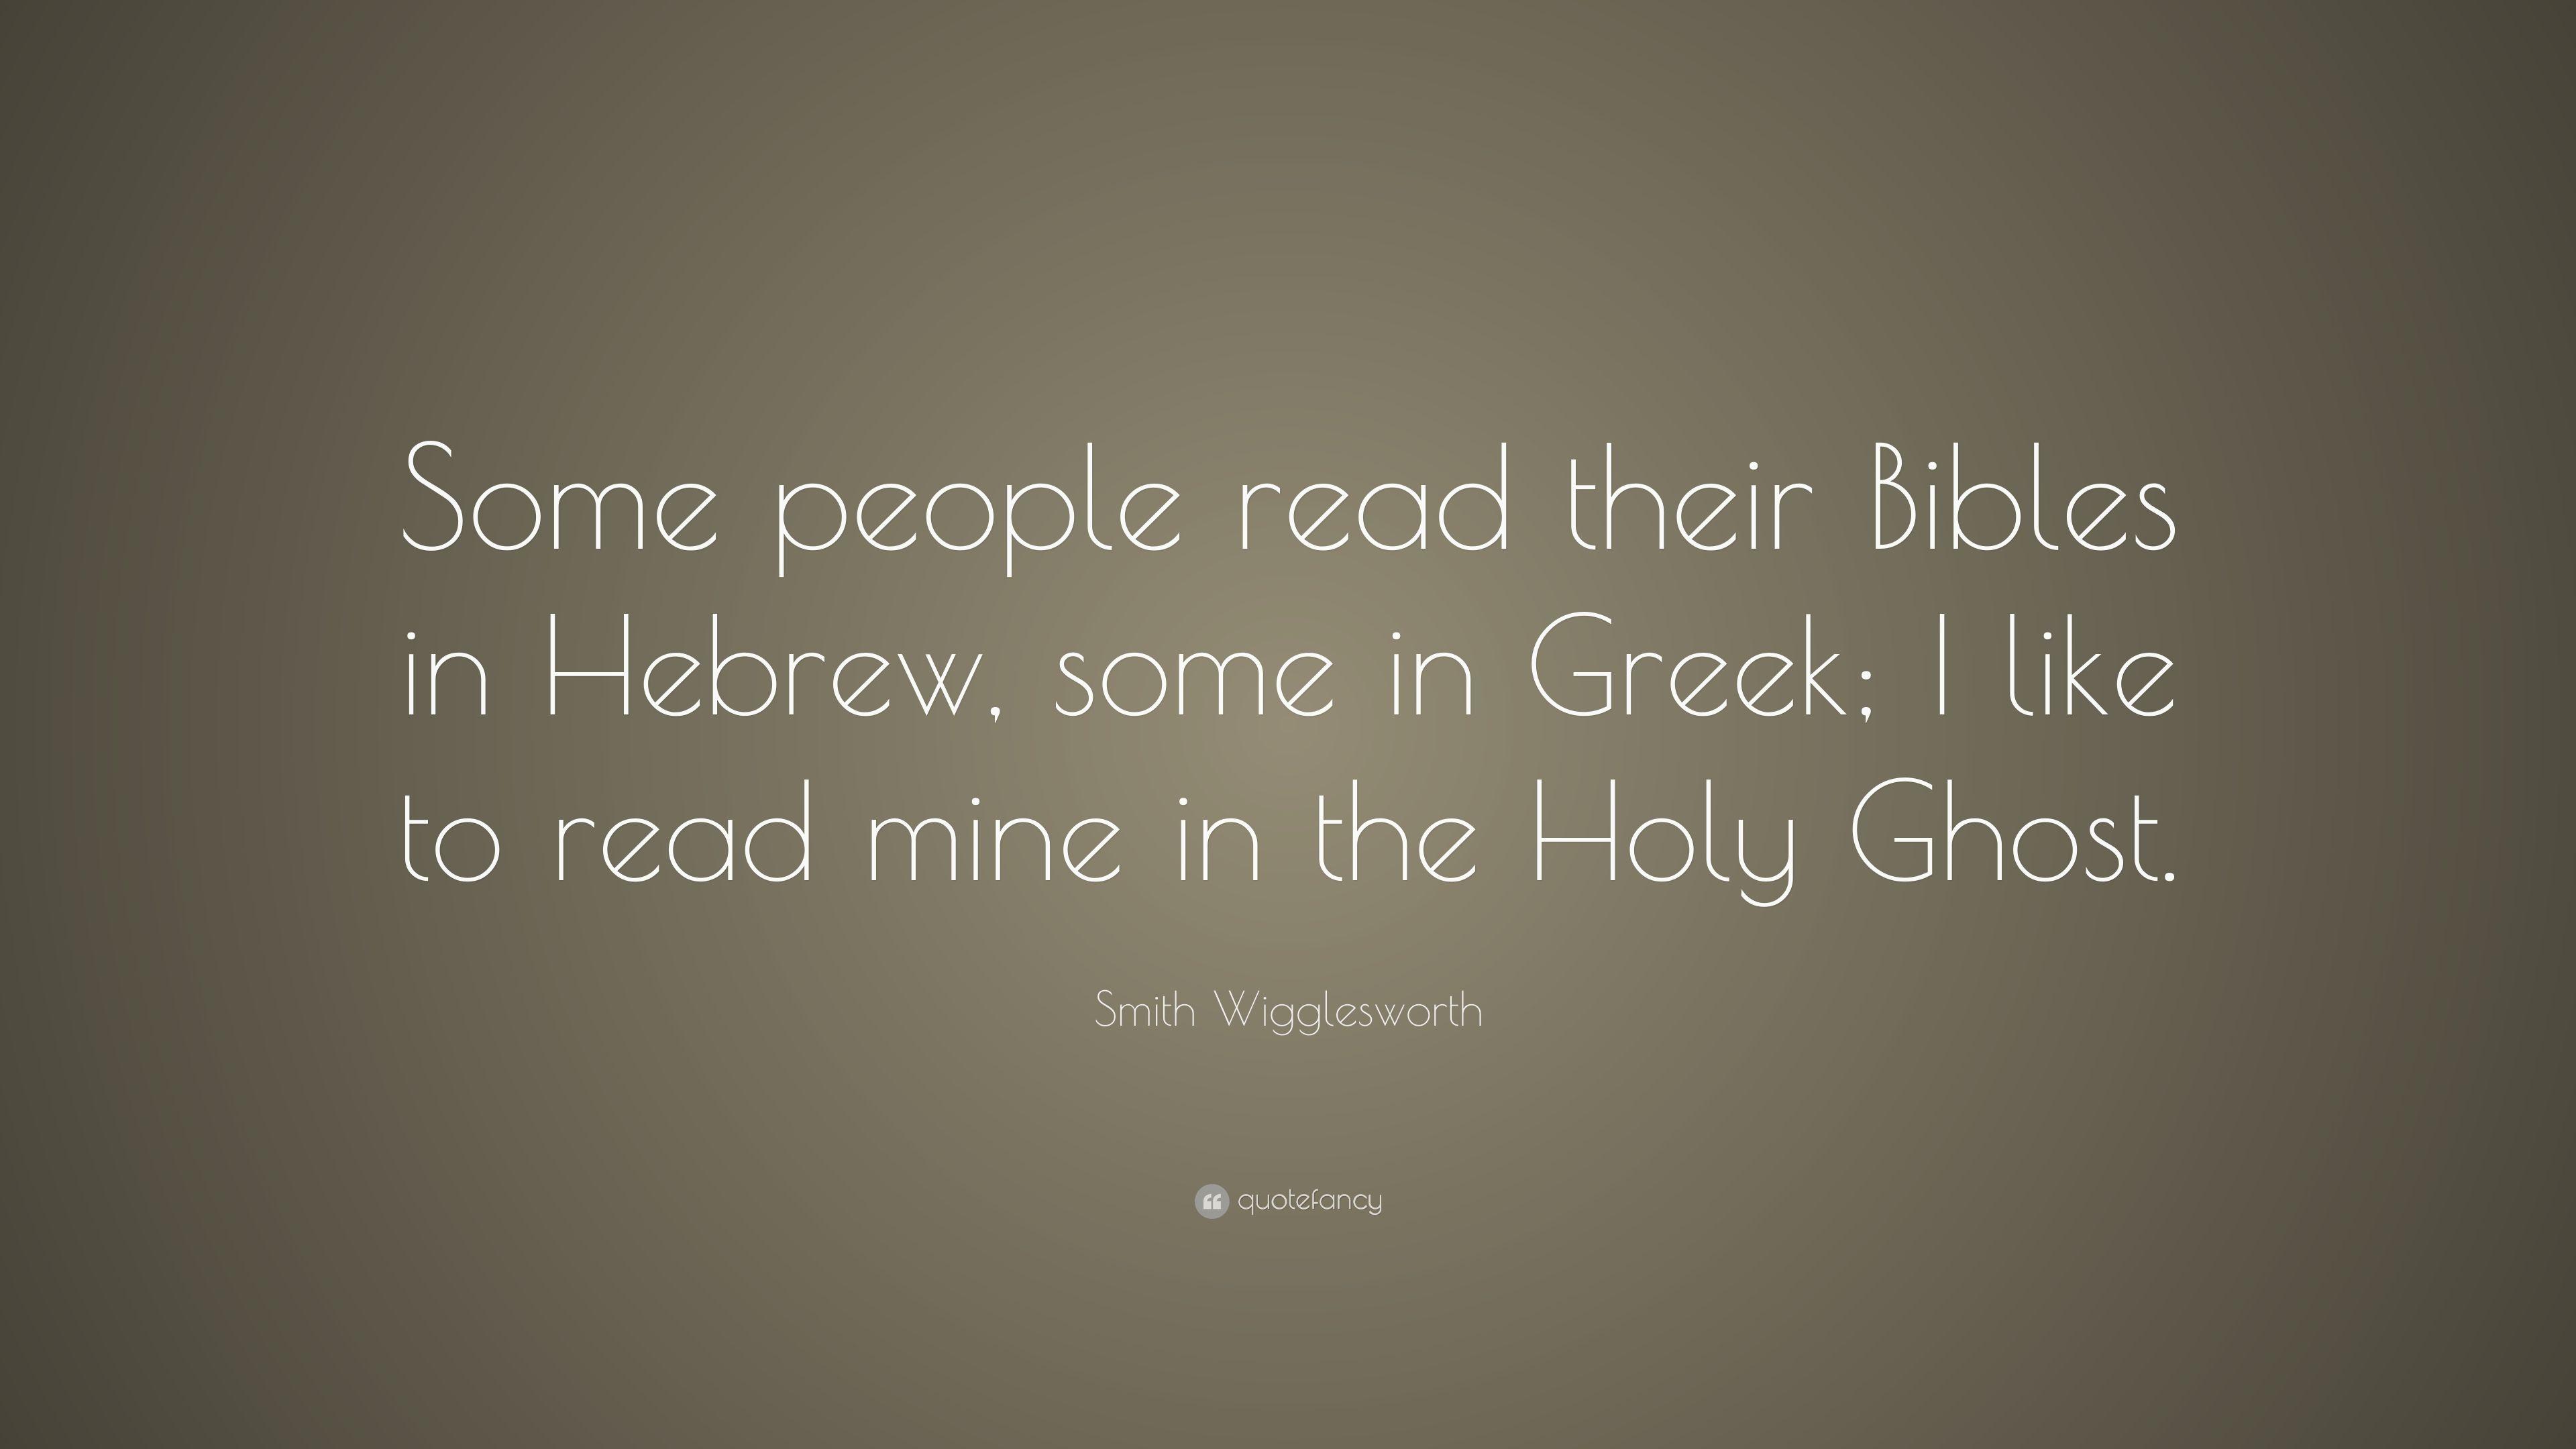 Smith Wigglesworth Quote: “Some people read their Bibles in Hebrew